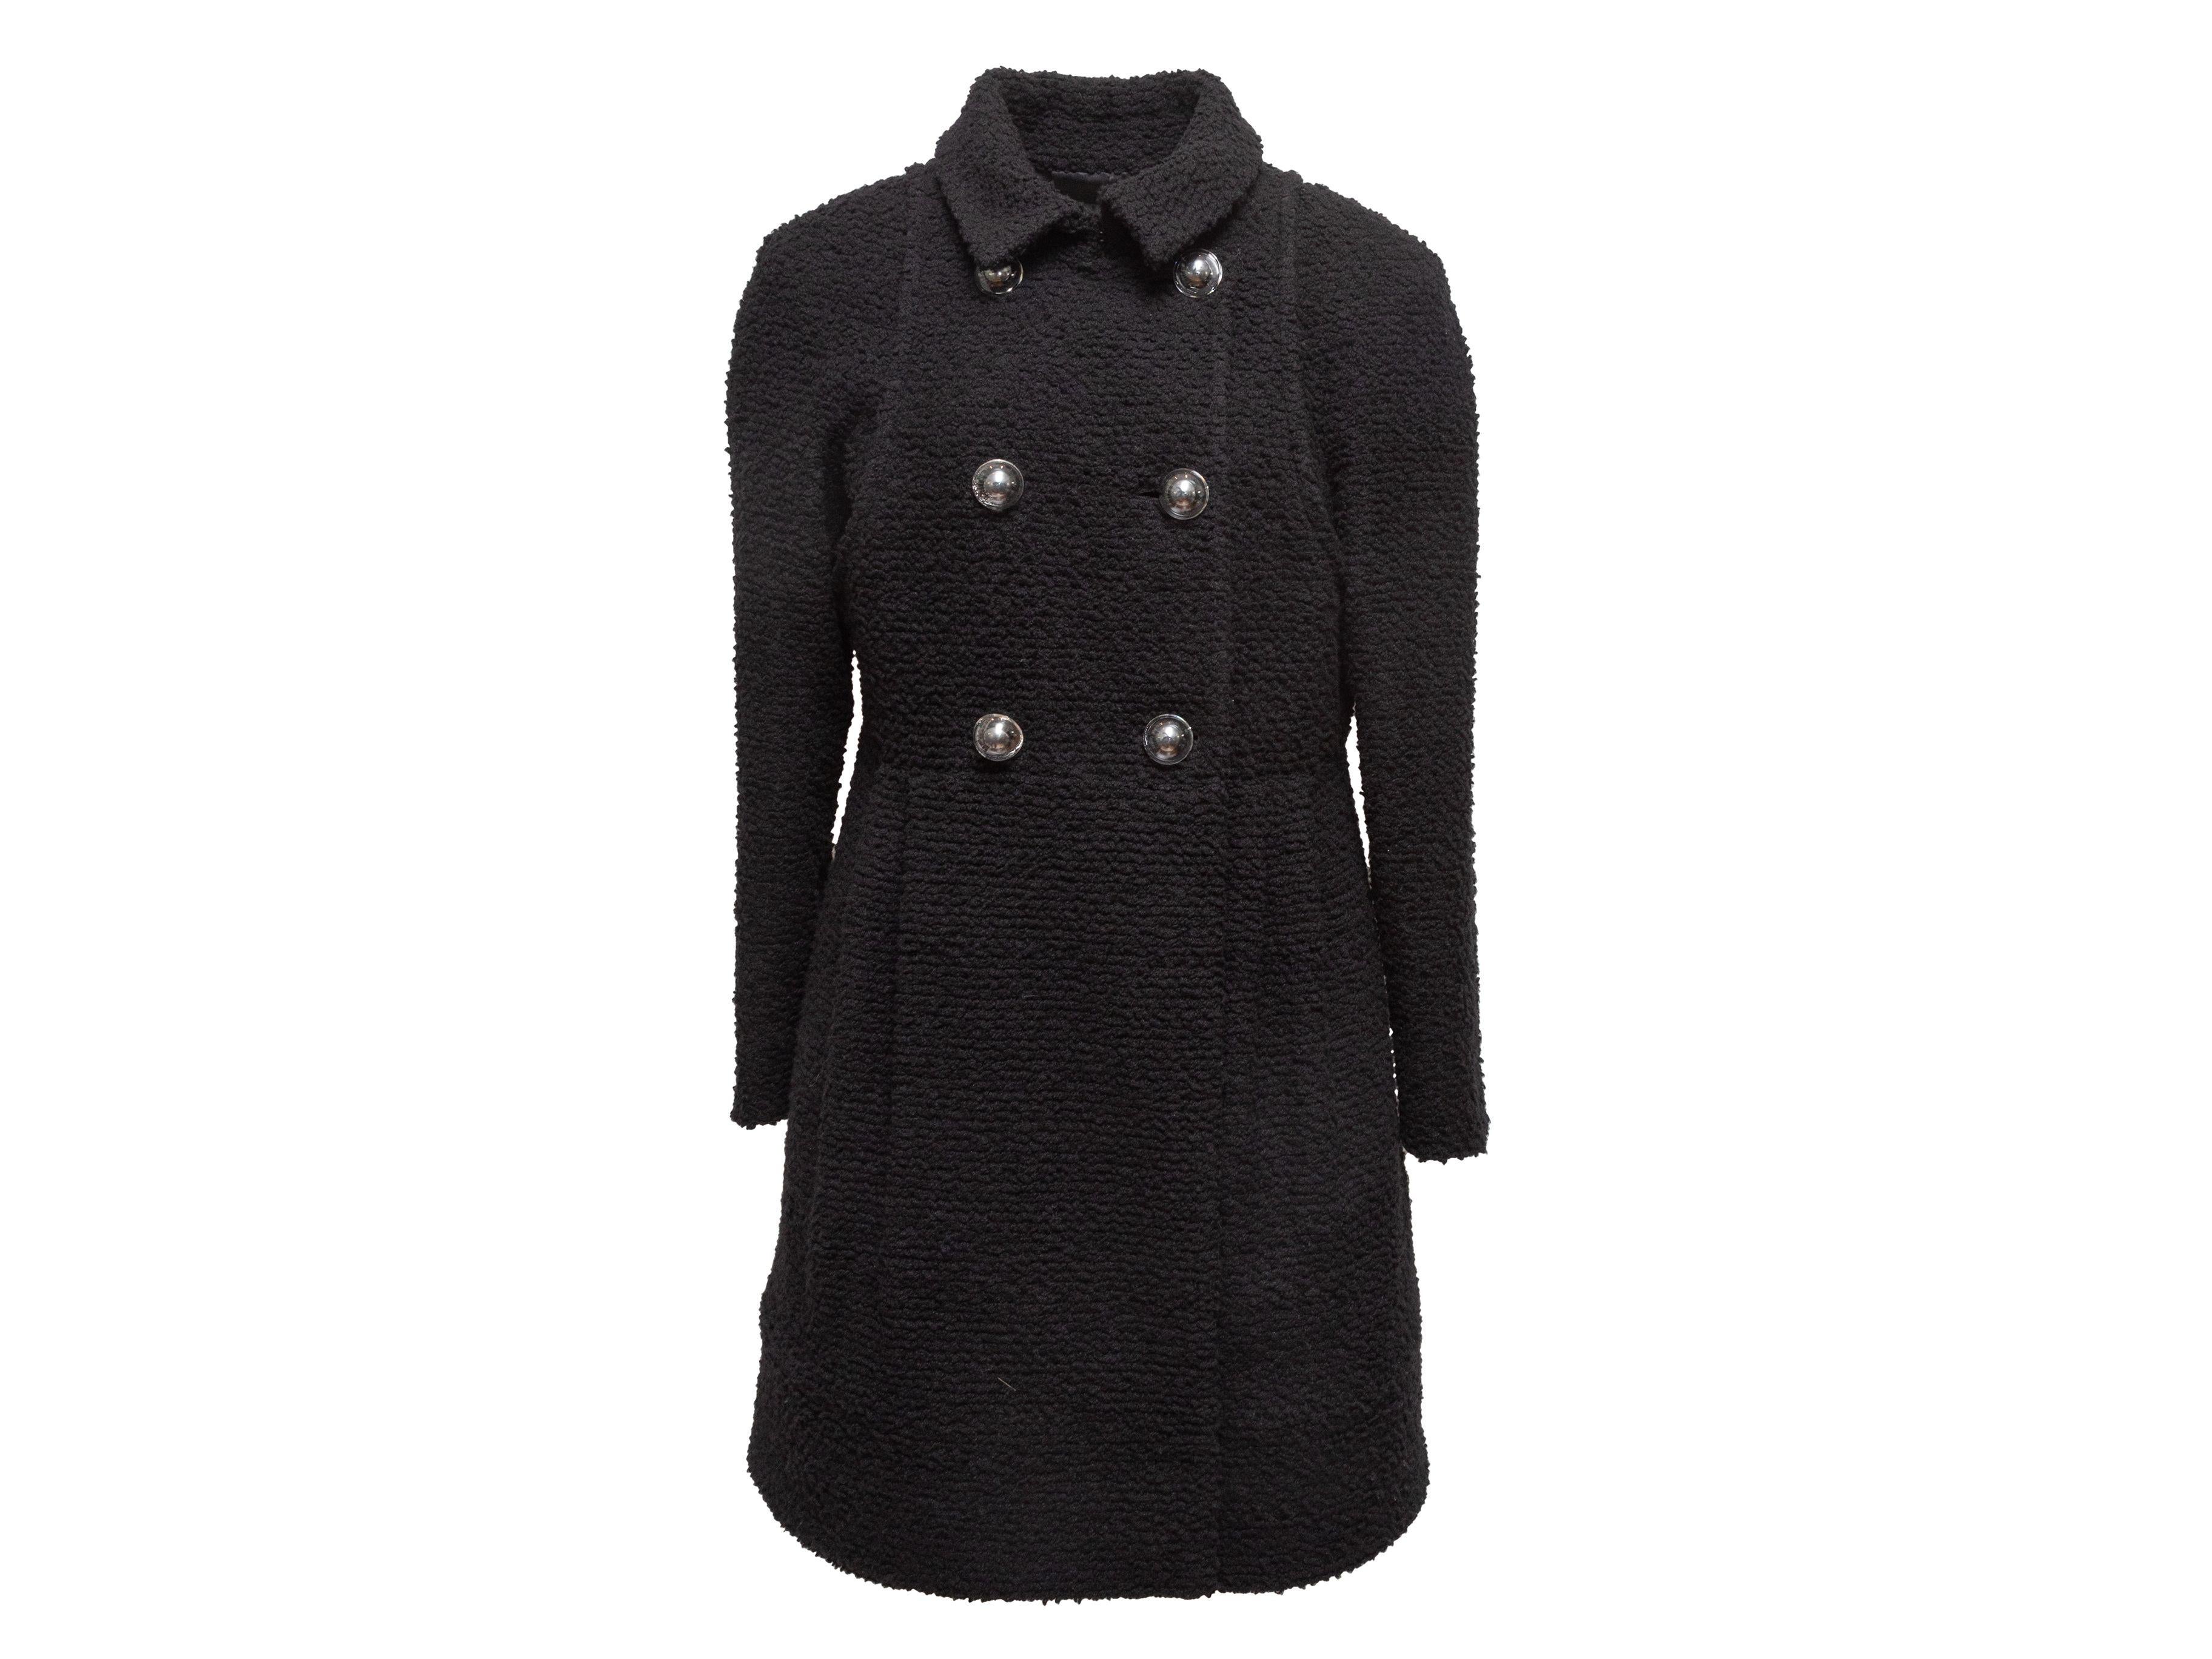 Chanel Black Boucle Wool Double-Breasted Coat 1